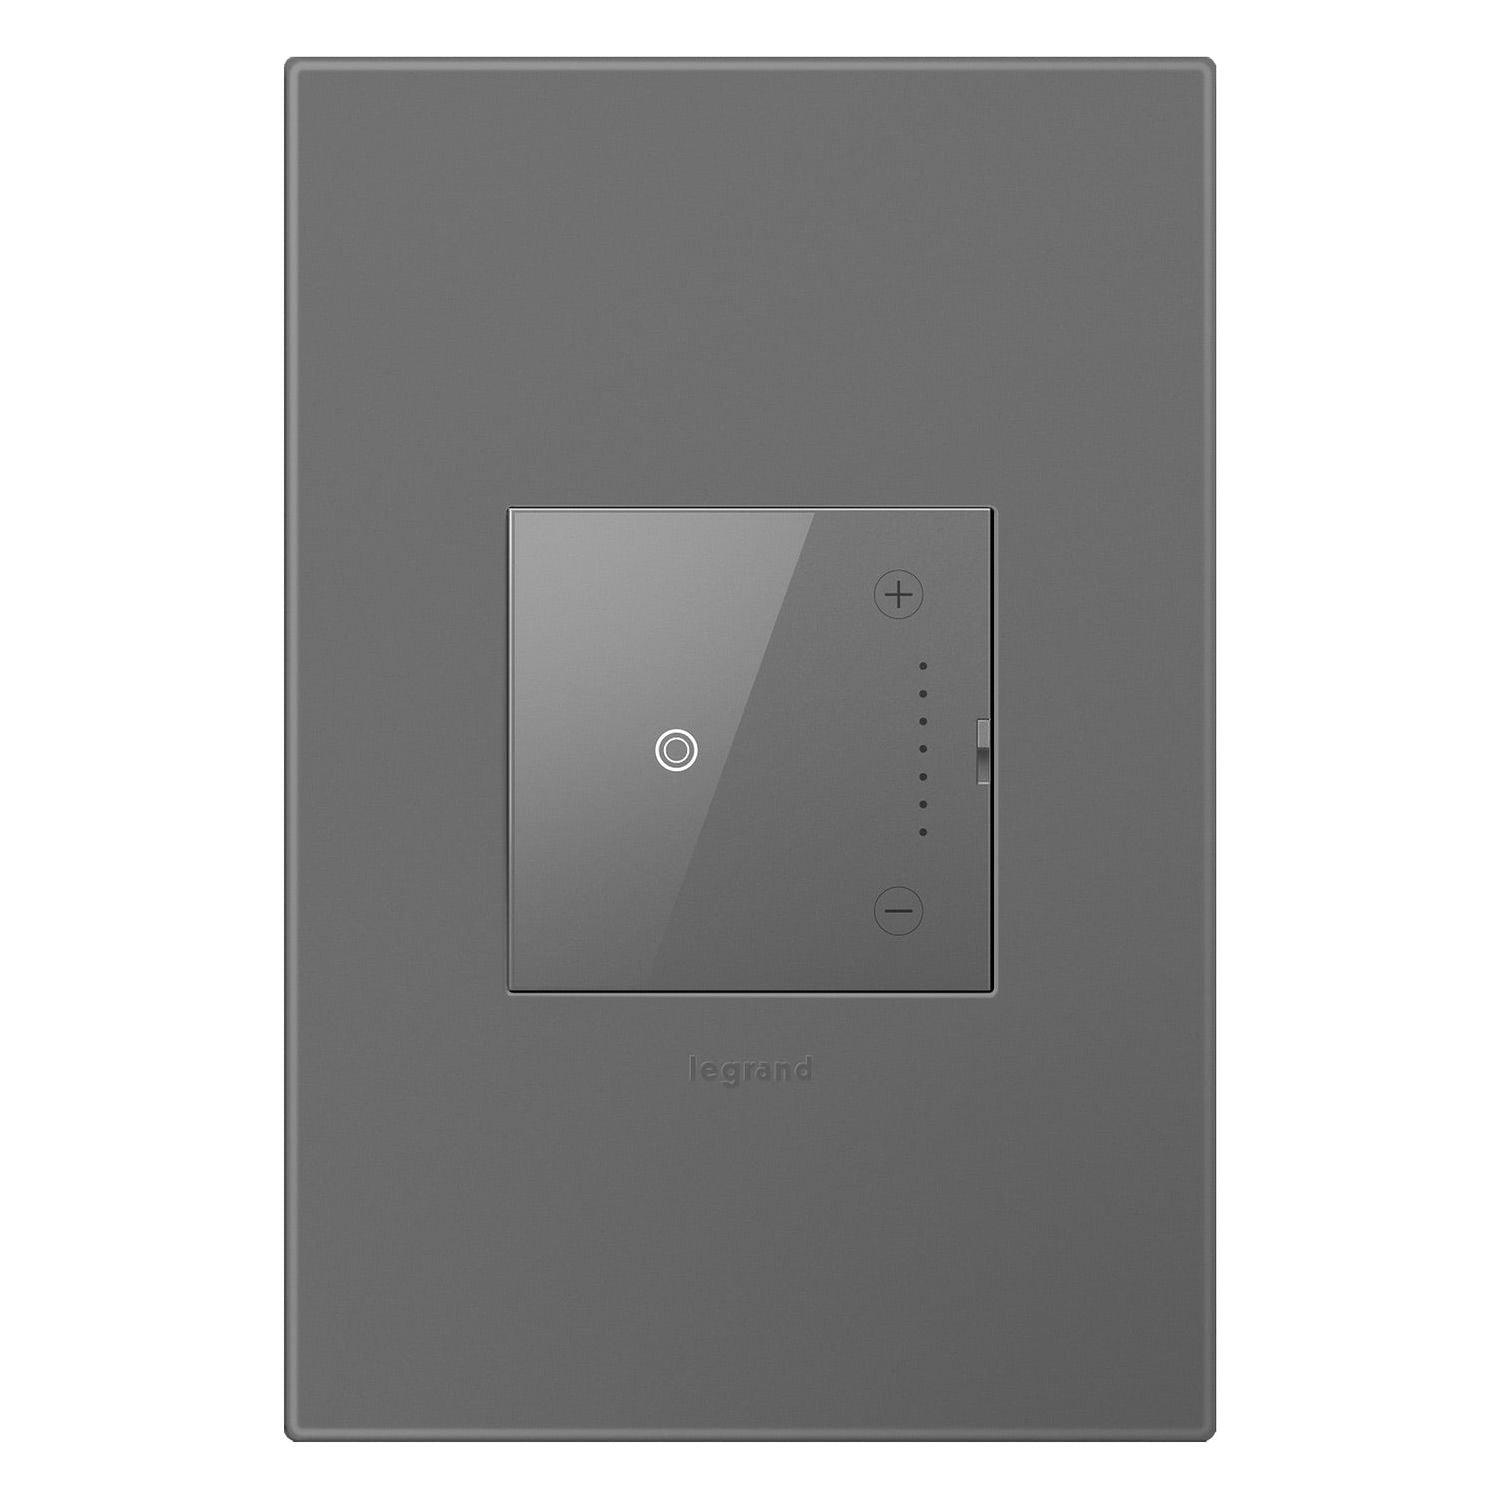 Legrand - 0-10V Touch Dimmer - Lights Canada